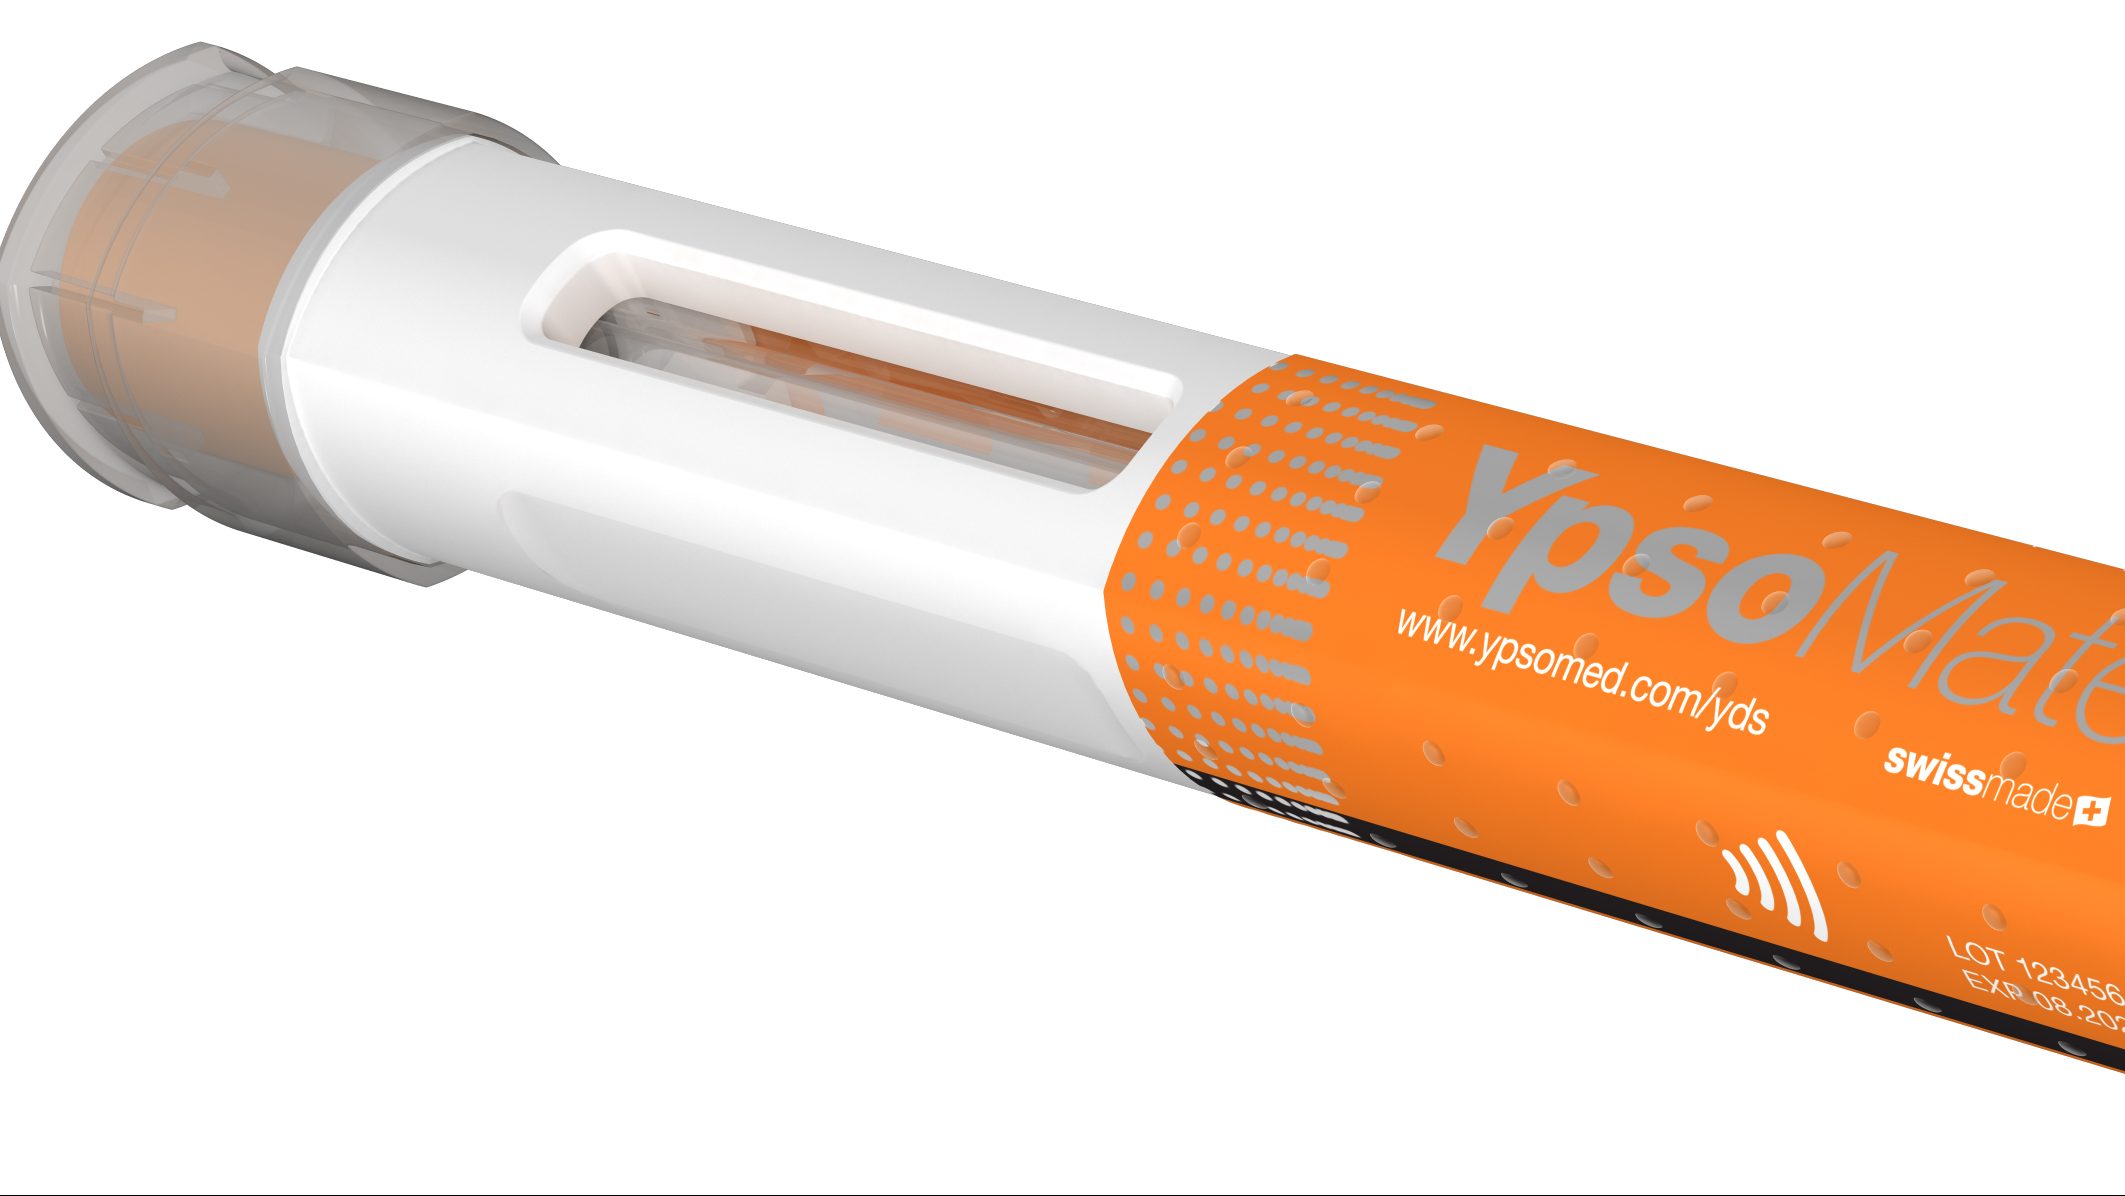 YpsoMate autoinjector with orange and white body